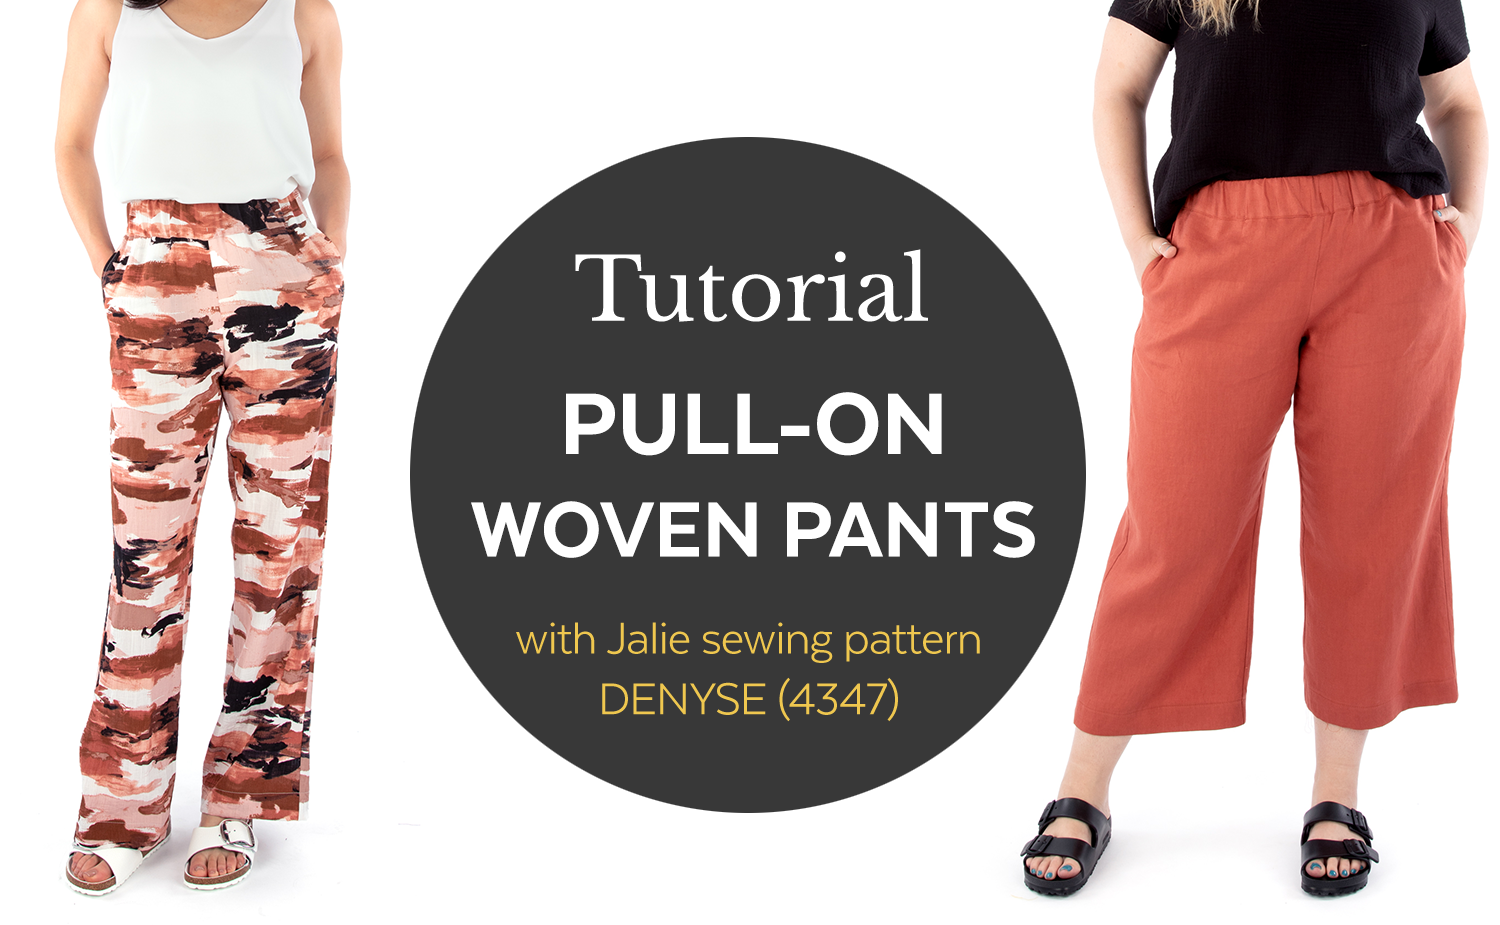 4347 / Denyse pull-on woven pants / Video Tutorial – Jalie